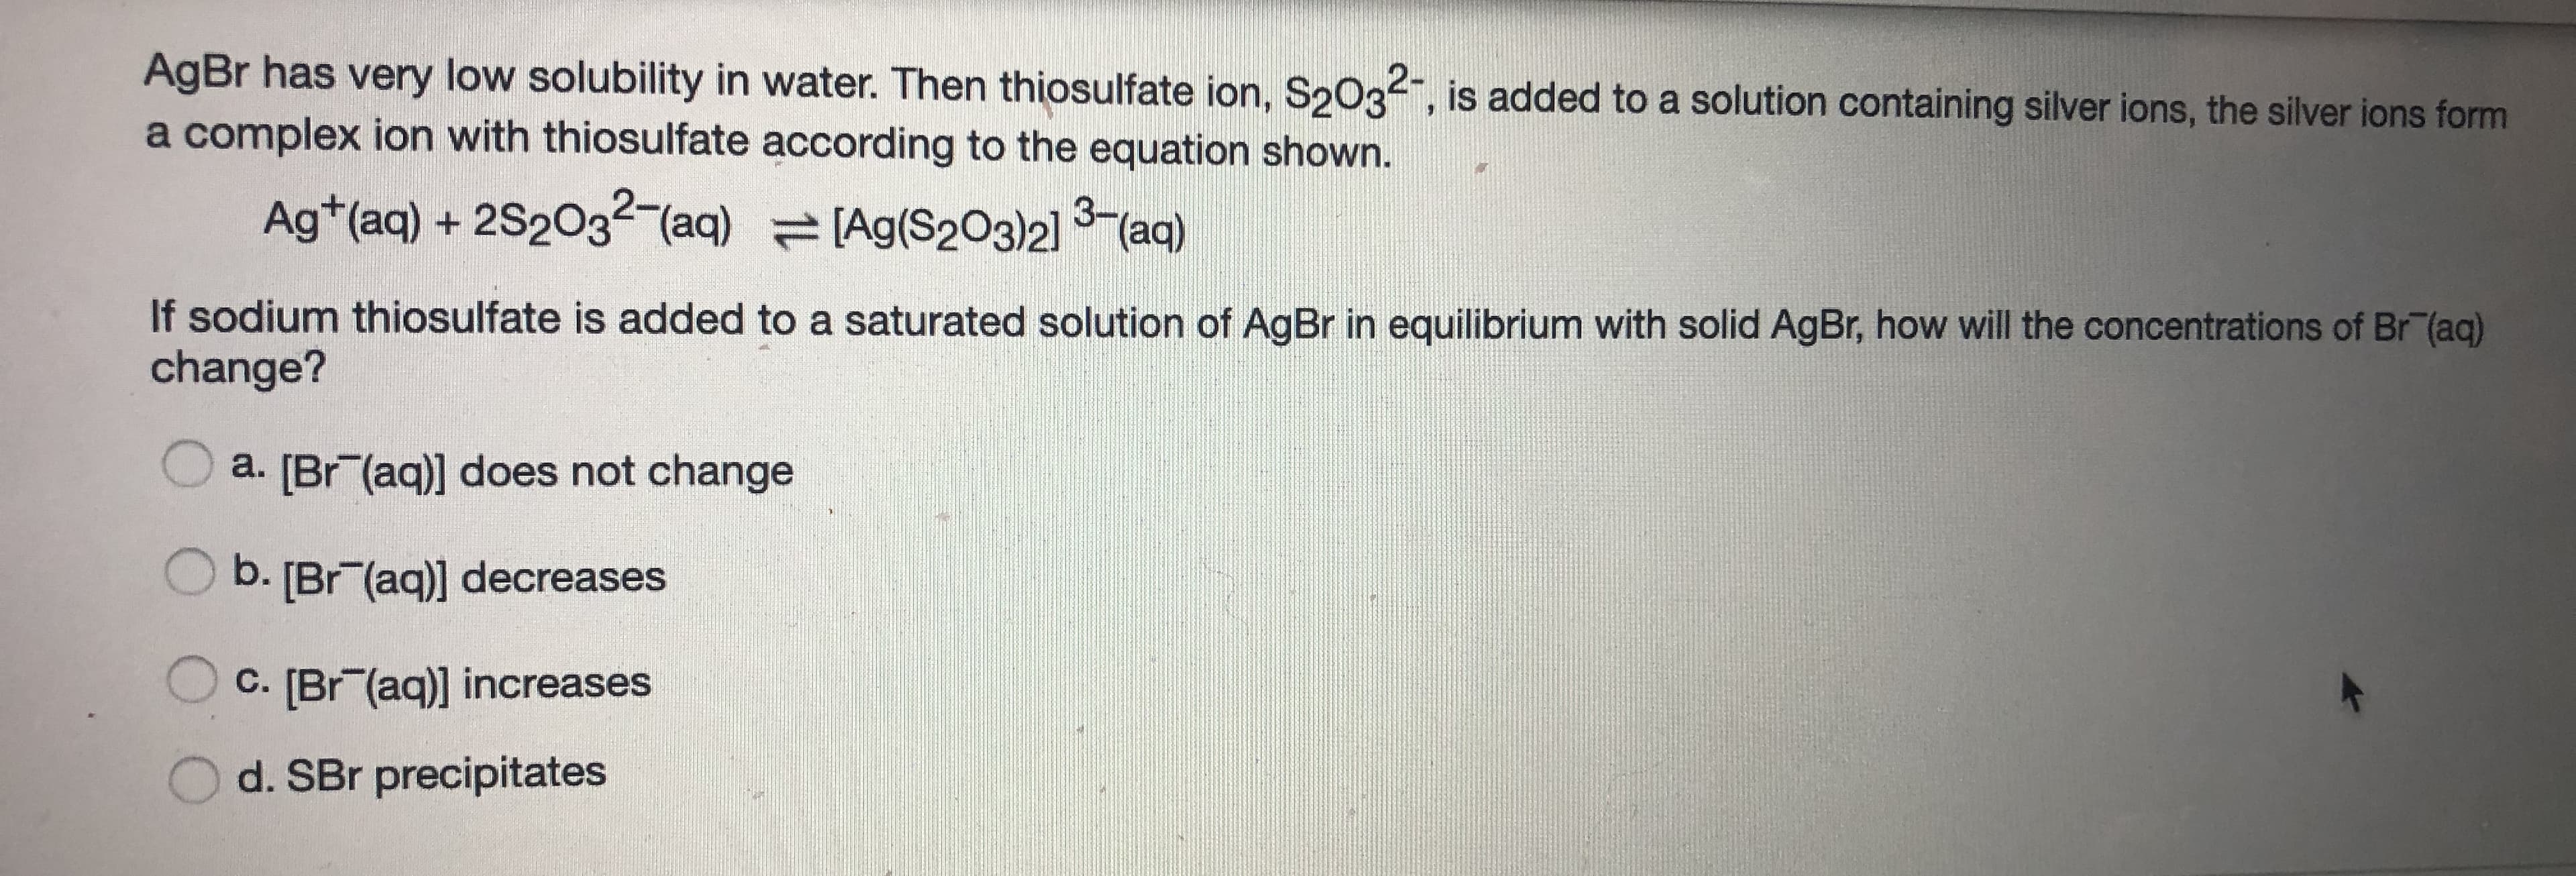 AgBr has very low solubility in water. Then thiosulfate ion, S2032, is added to a solution containing silver ions, the silver ions form
a complex ion with thiosulfate according to the equation shown.
Ag*(aq) + 2S203²-(aq) (Ag(S203)21 3-(aq)
If sodium thiosulfate is added to a saturated solution of AgBr in equilibrium with solid AgBr, how will the concentrations of Br"(aq)
change?
a. [Br (aq)] does not change
b. [Br (aq)] decreases
C. [Br (aq)] increases
d. SBr precipitates
